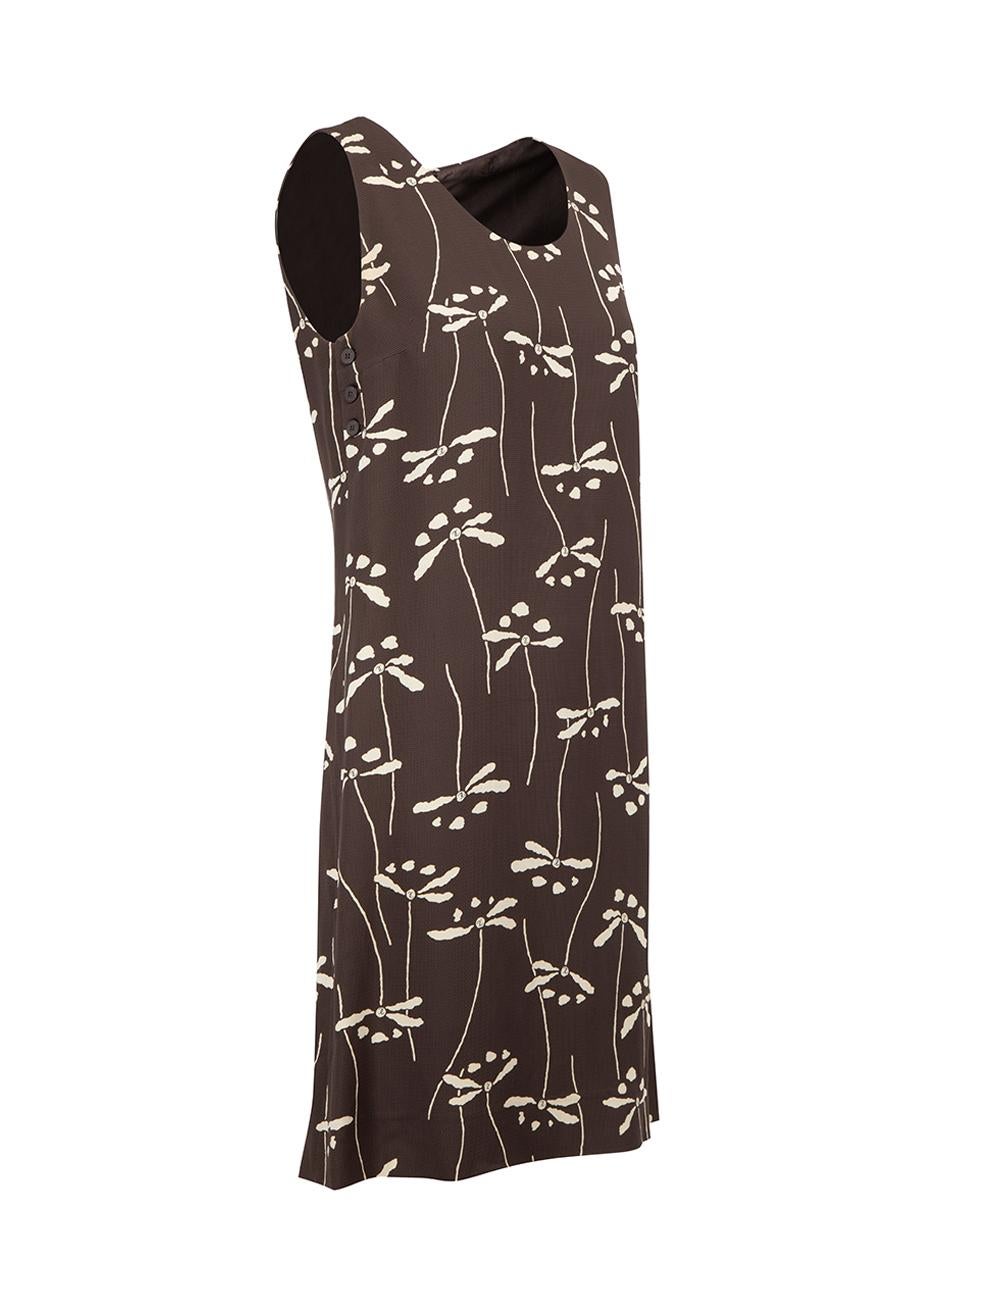 CONDITION is Good. General wear to dress is evident. Moderate signs of fading and discolouration to underarm fabric on this used Chanel designer resale item. 



Details


Vintage 1998

Brown

Viscose

Knee length dress

Floral print with CC